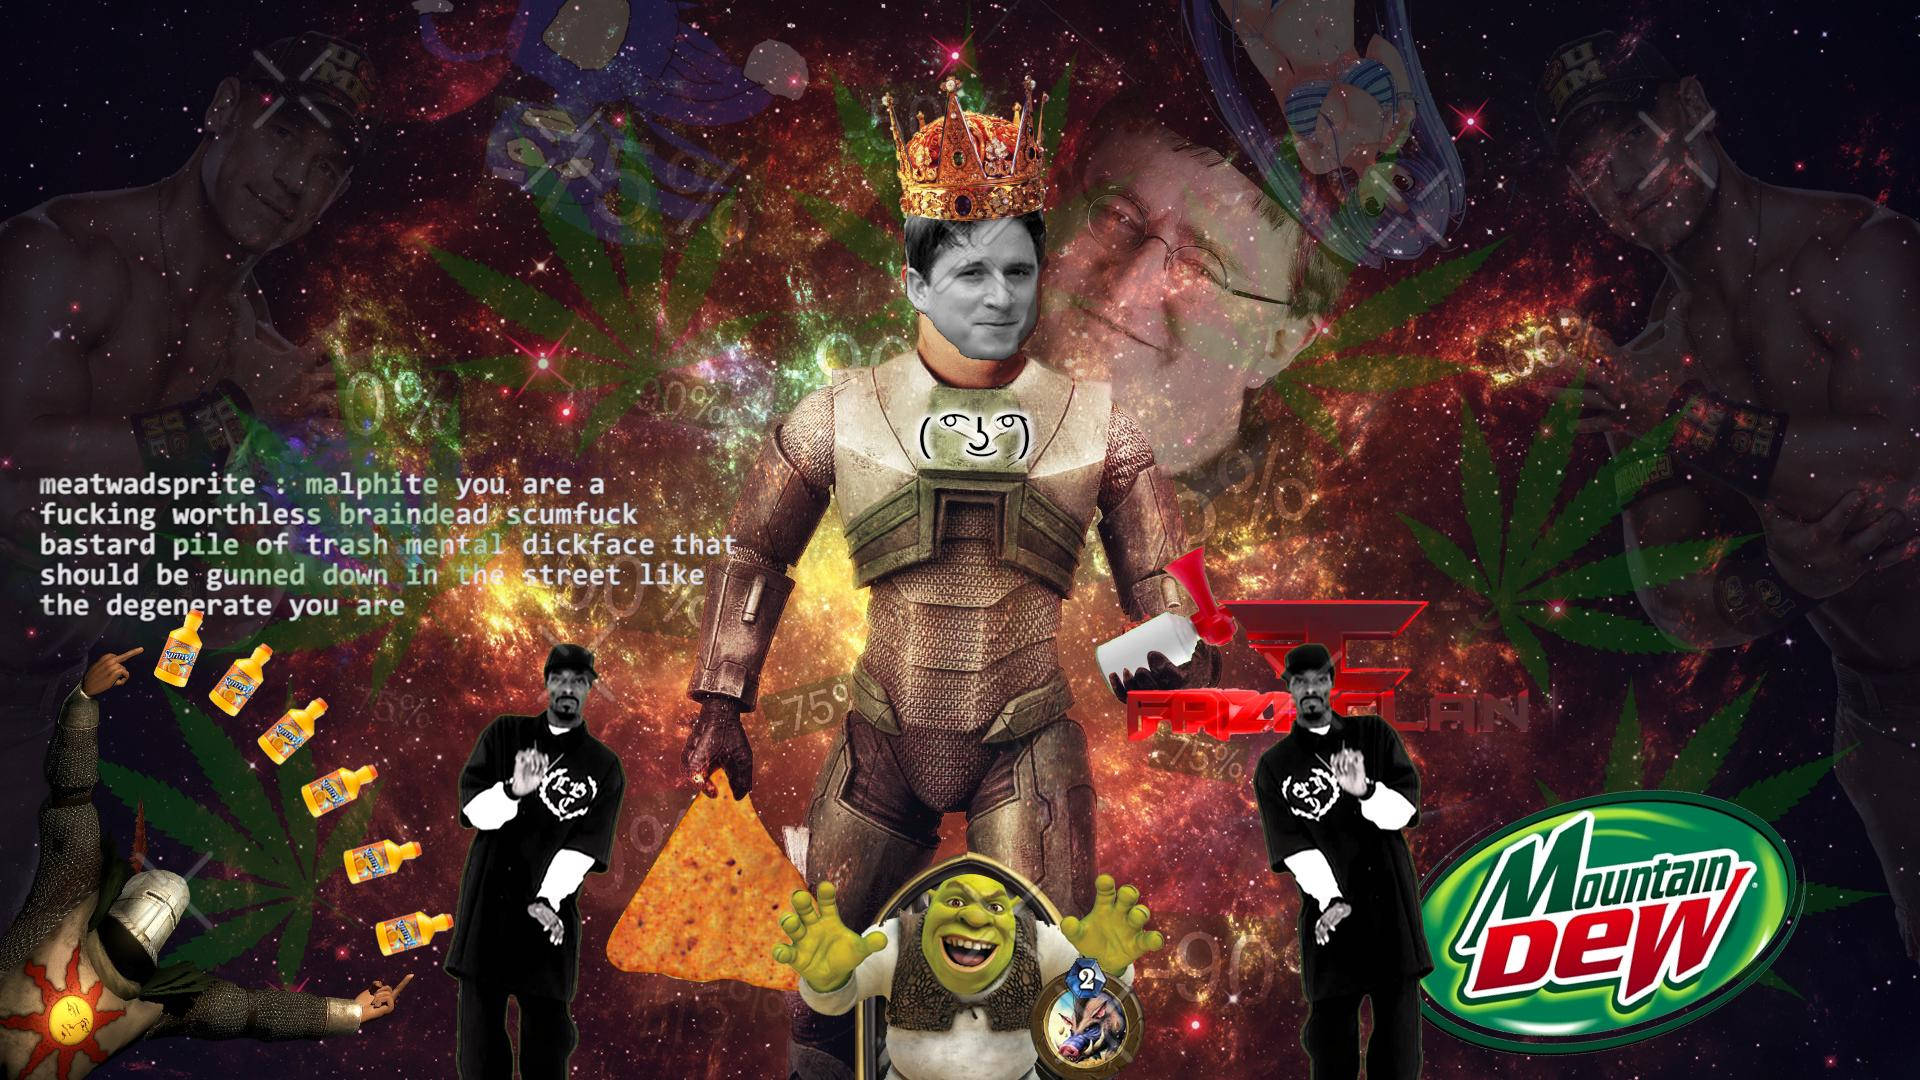 Grey face man with kings crown on a mountain dew meme.